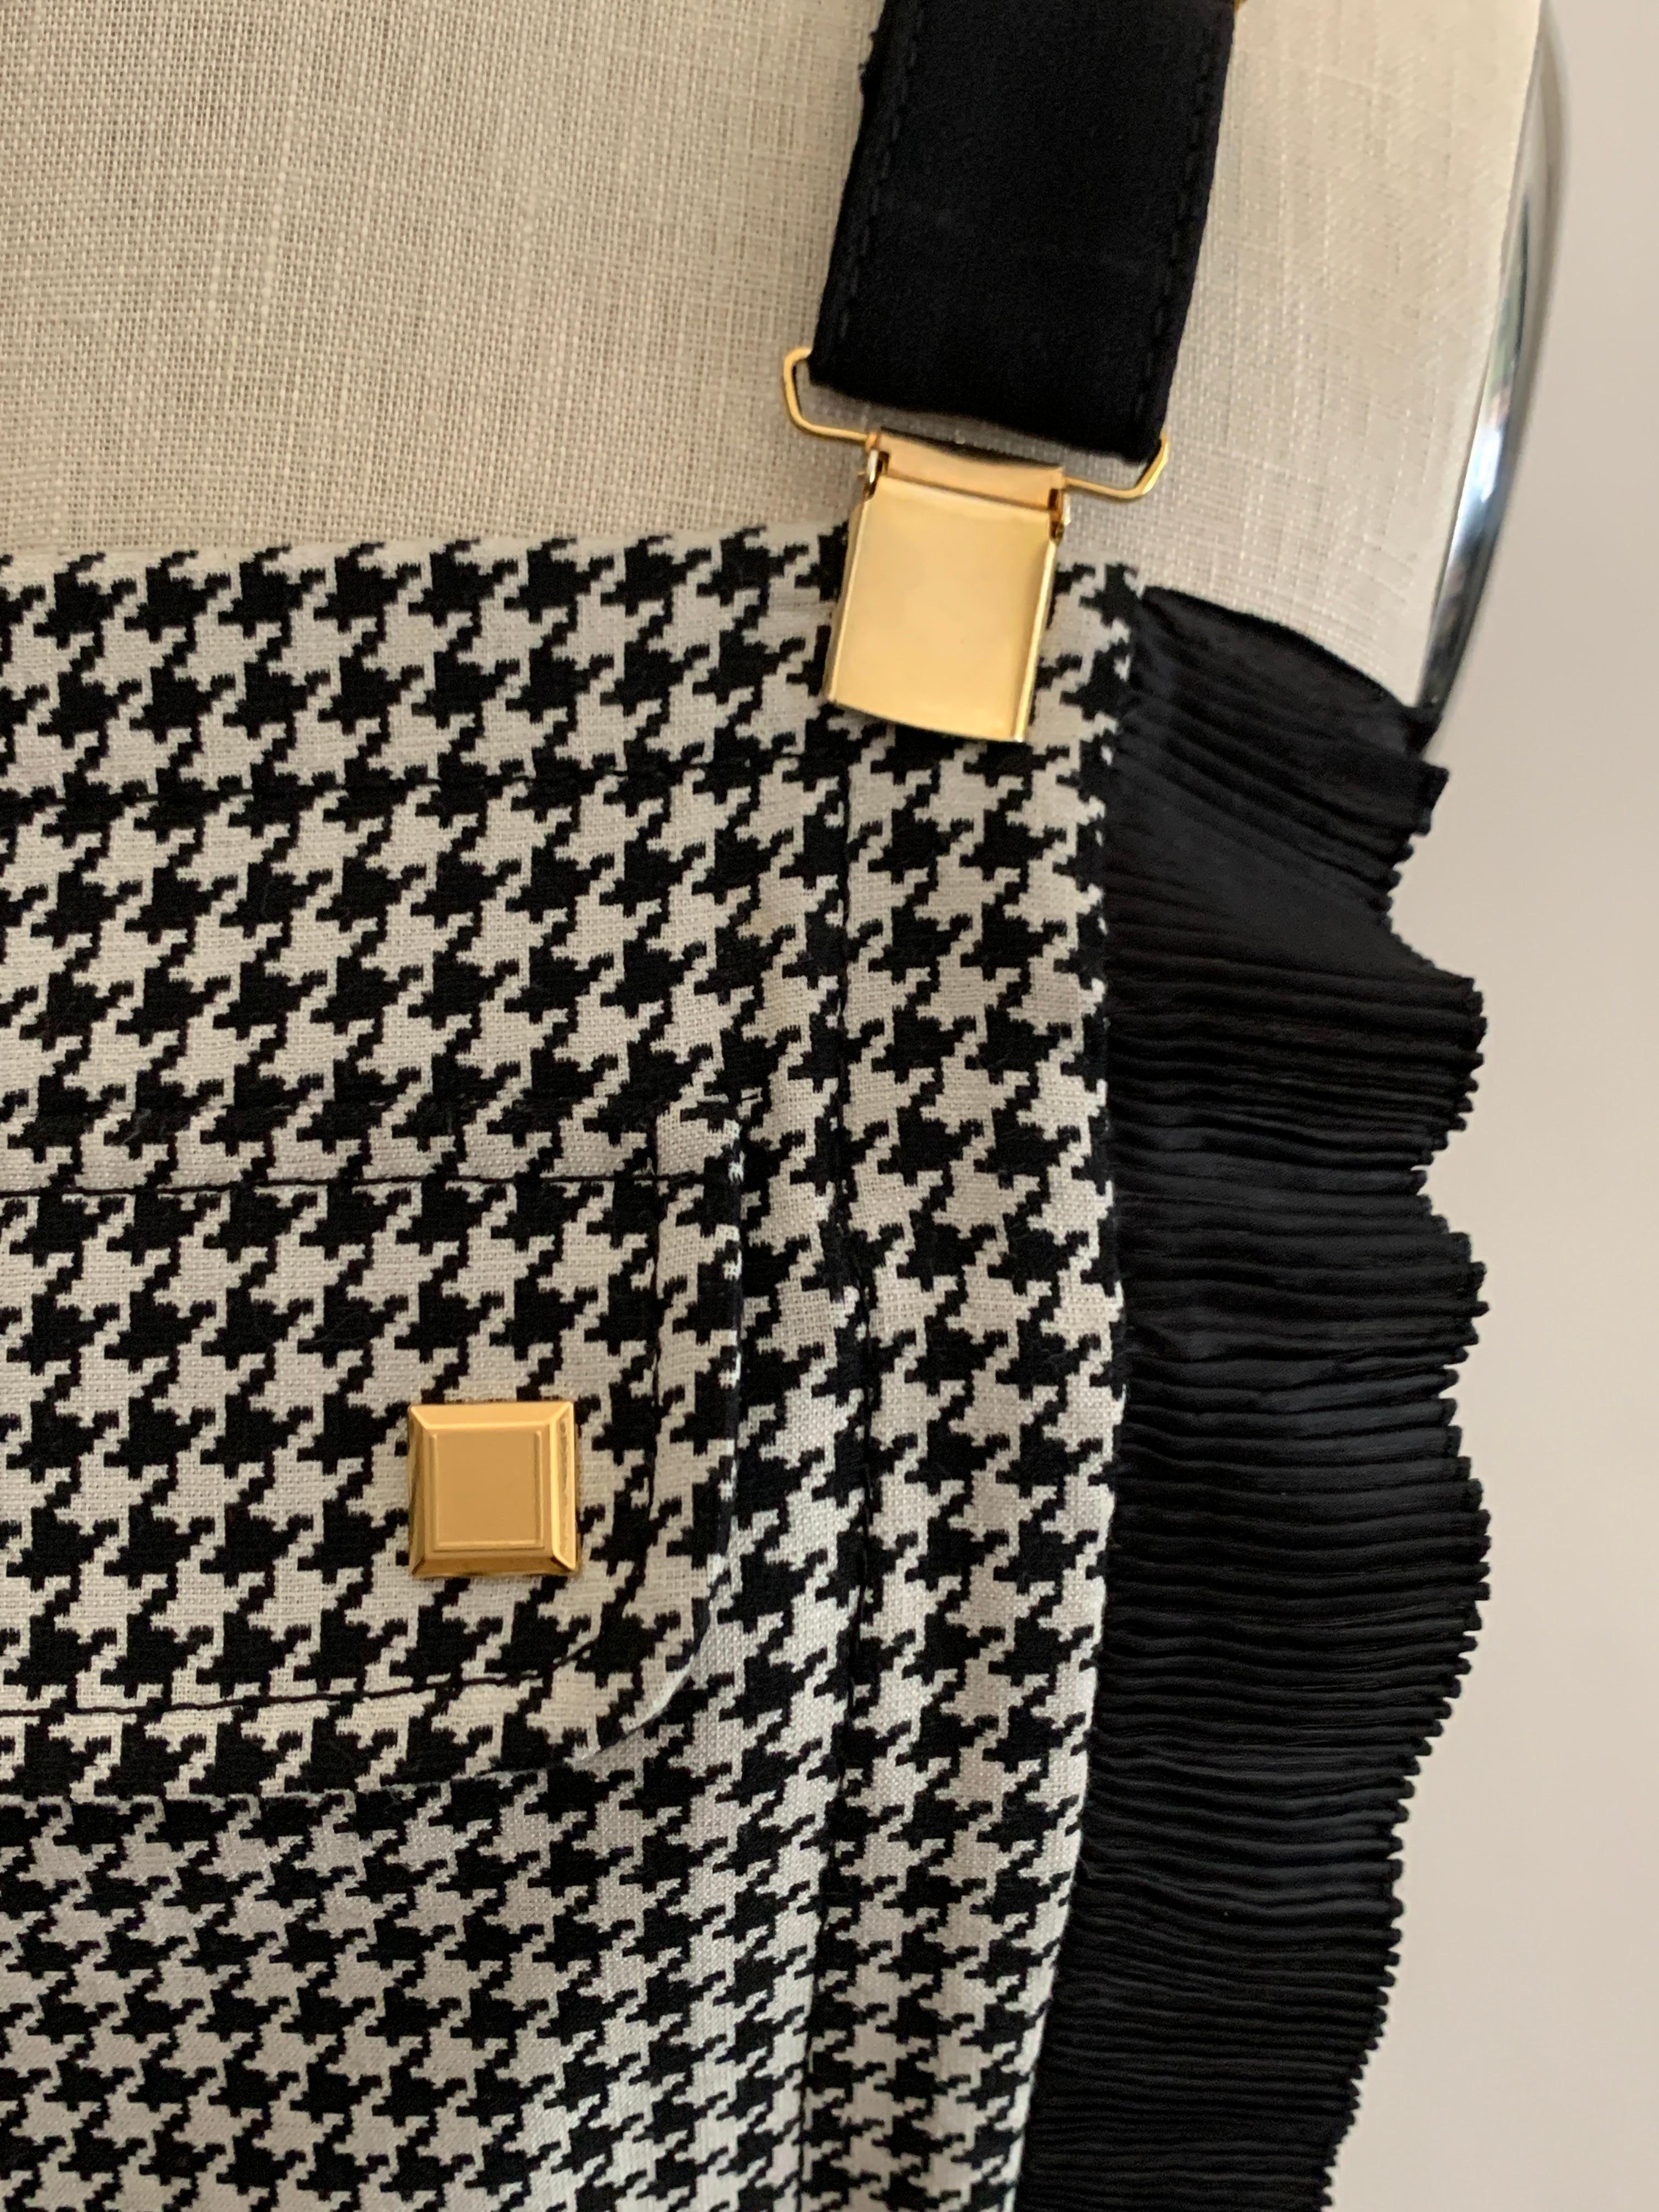 Emanuel Ungaro black and white houndstooth check resort 2014 dress with suspender style straps and pleated trim detail. Faux pocket flap at front with gold stud detail. Side zip.

Made in Italy.

55% wool, 44% rayon, 1% other.
Fully lined in 60%